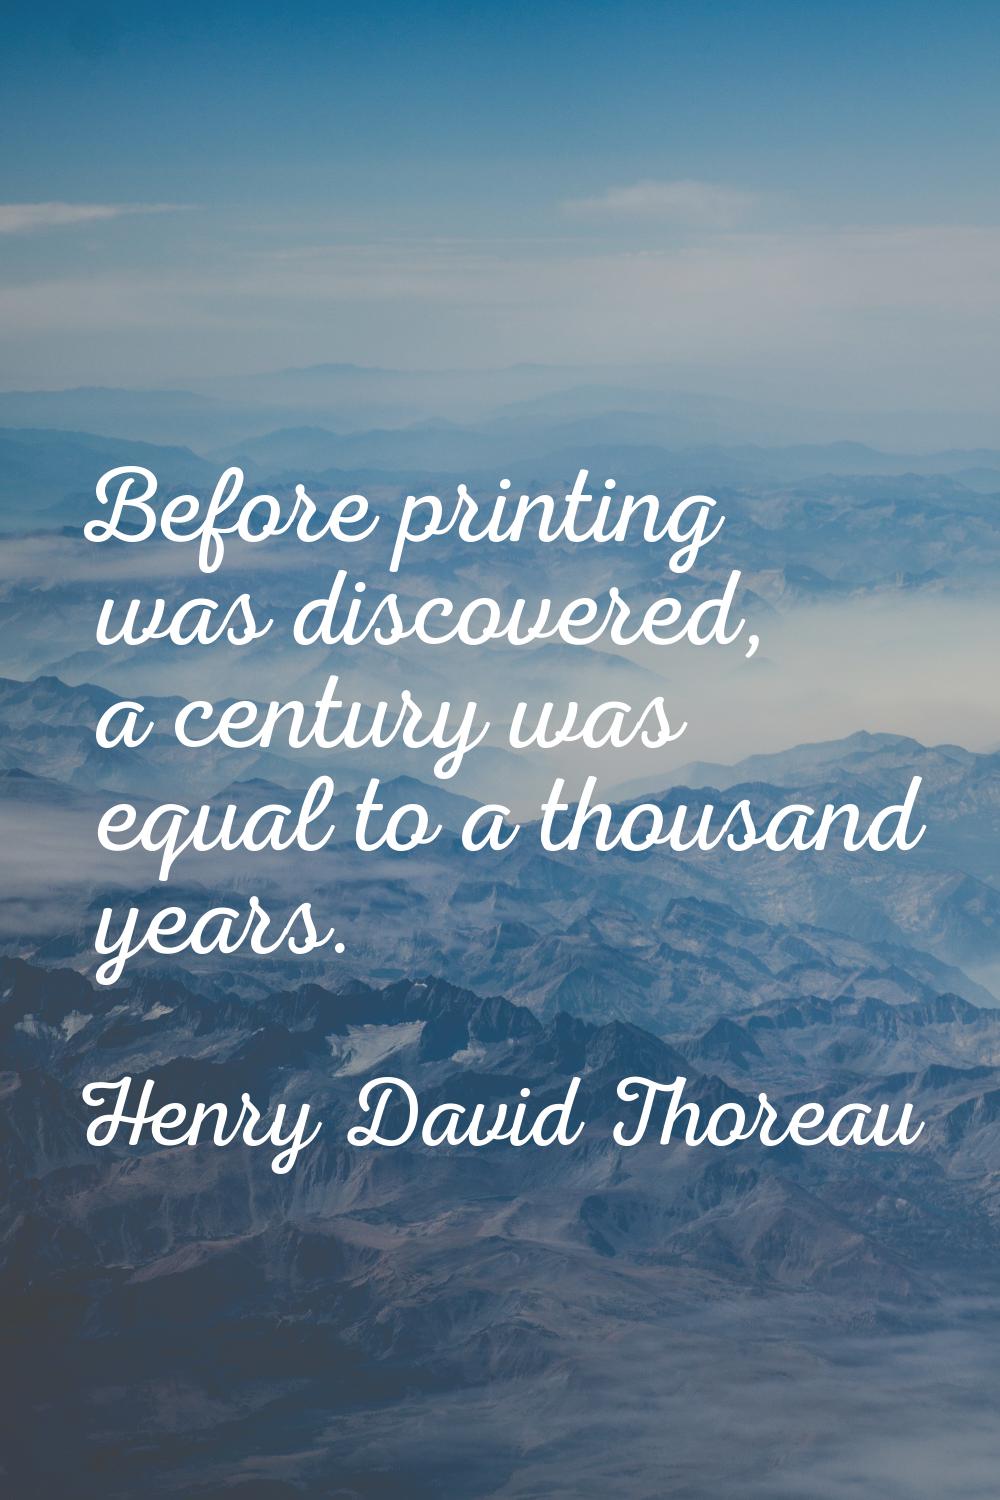 Before printing was discovered, a century was equal to a thousand years.